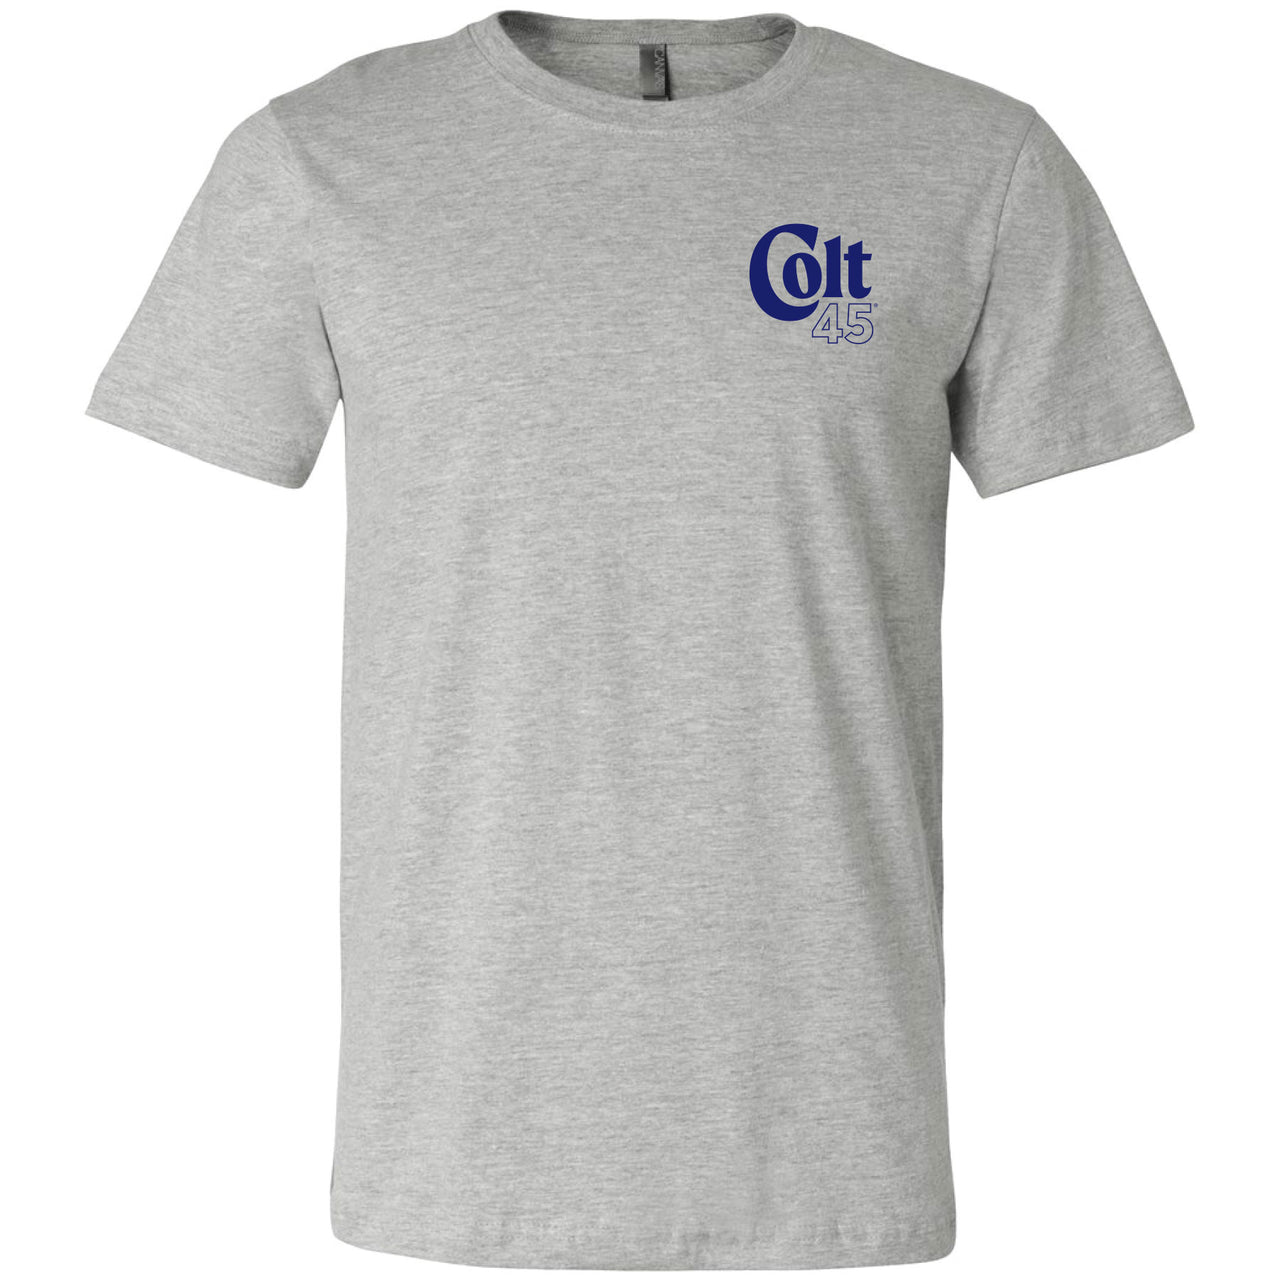 Colt 45 - Works Every Time 2-sided T-shirt